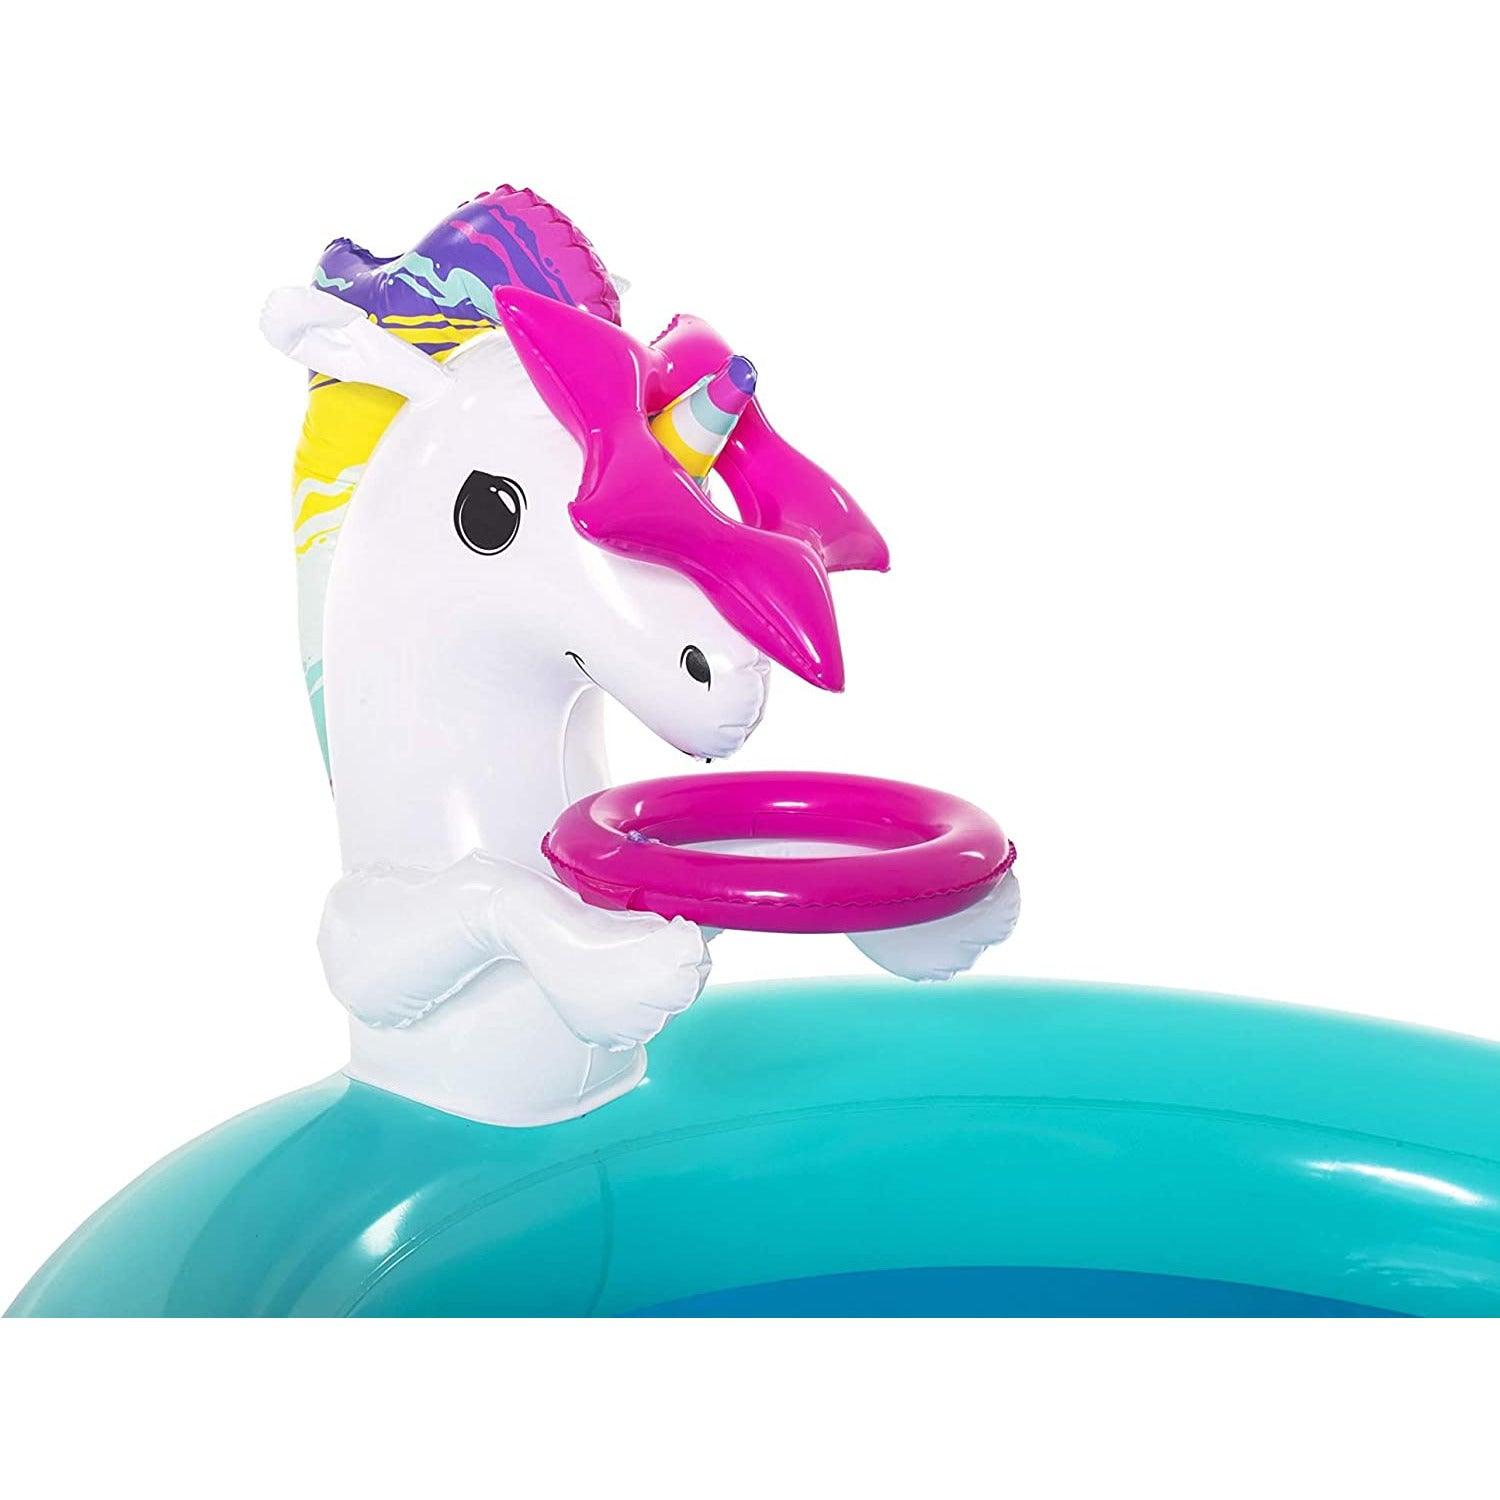 Bestway 53097 Inflatable Play Center with Inflatable Unicorn - BumbleToys - 8-13 Years, Boys, Eagle Plus, Floaters, Island, Sand Toys Pools & Inflatables